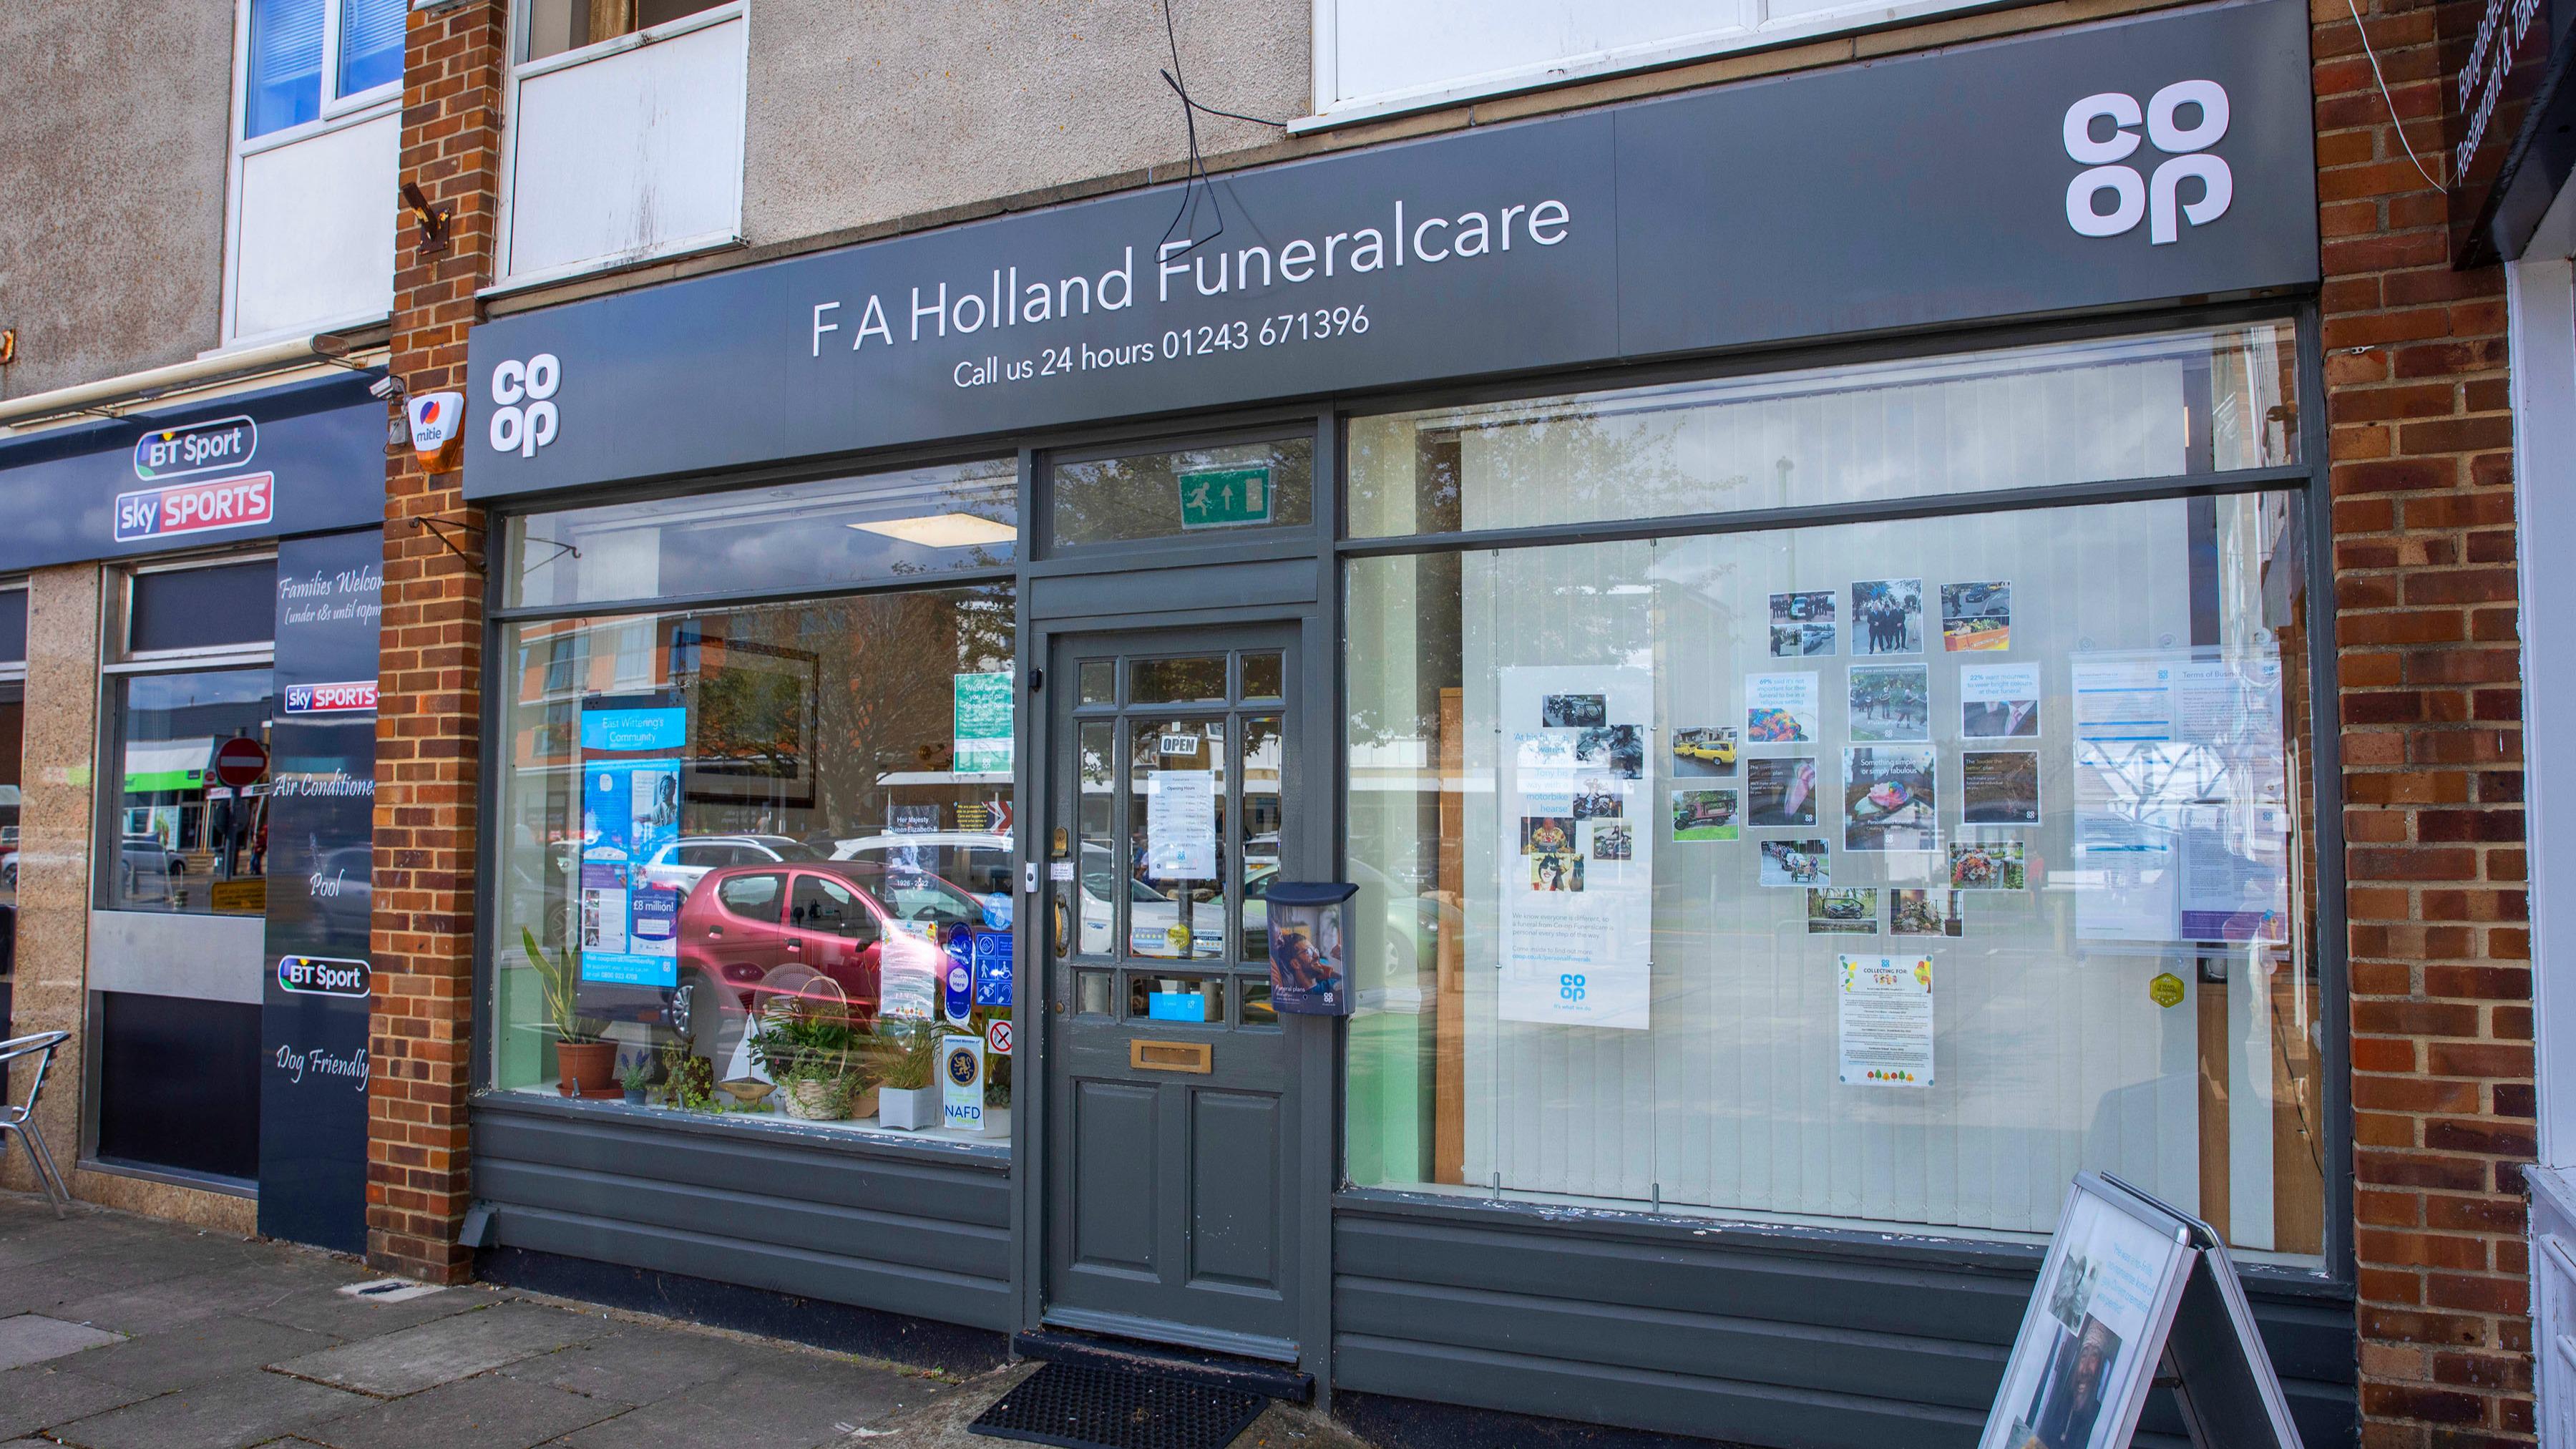 Images F A Holland Funeralcare